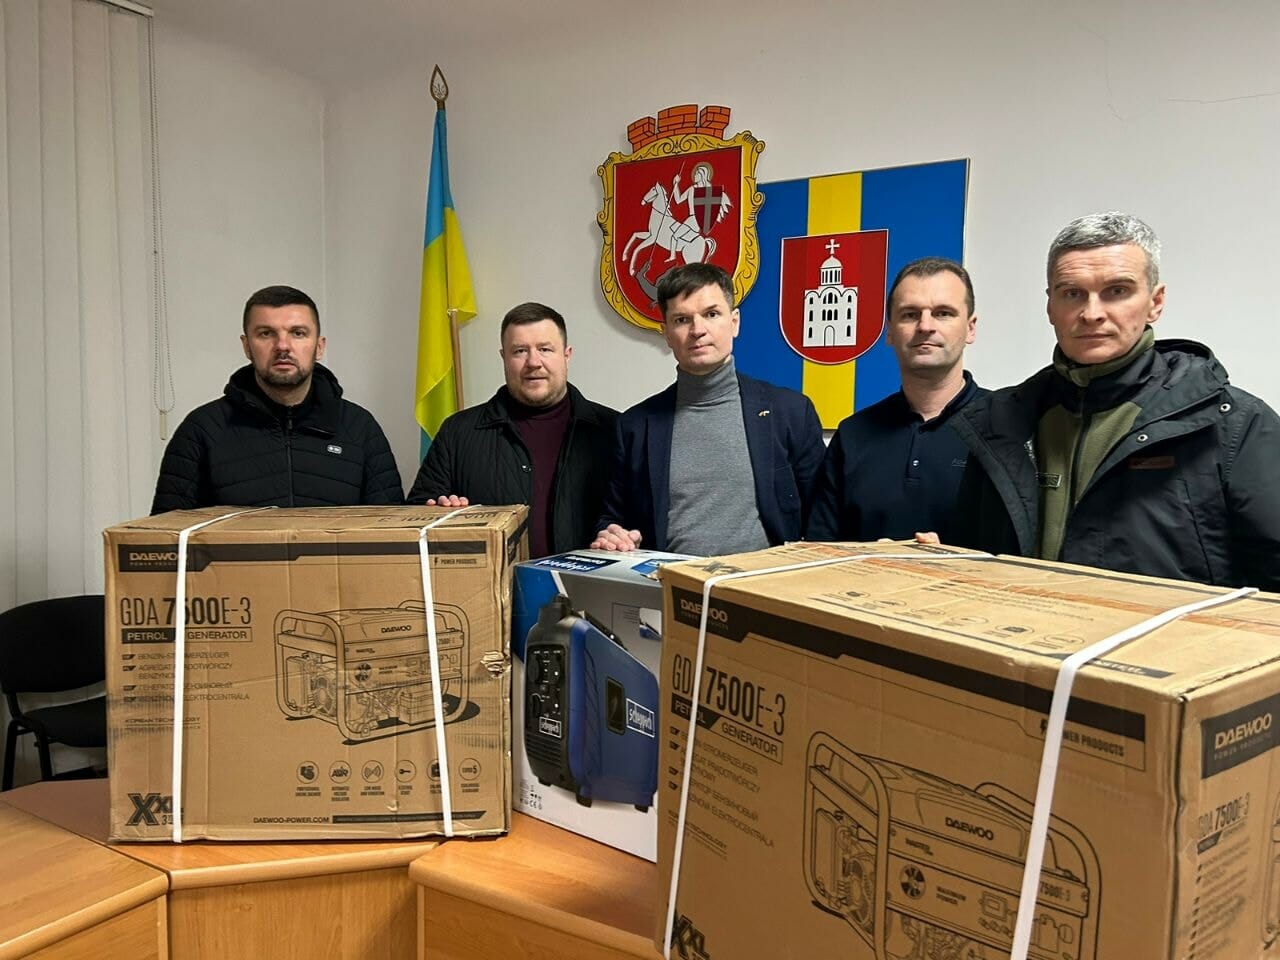 Representatives of the Lithuanian Seimas handed over two generators for the needs of the community and a scope for military personnel